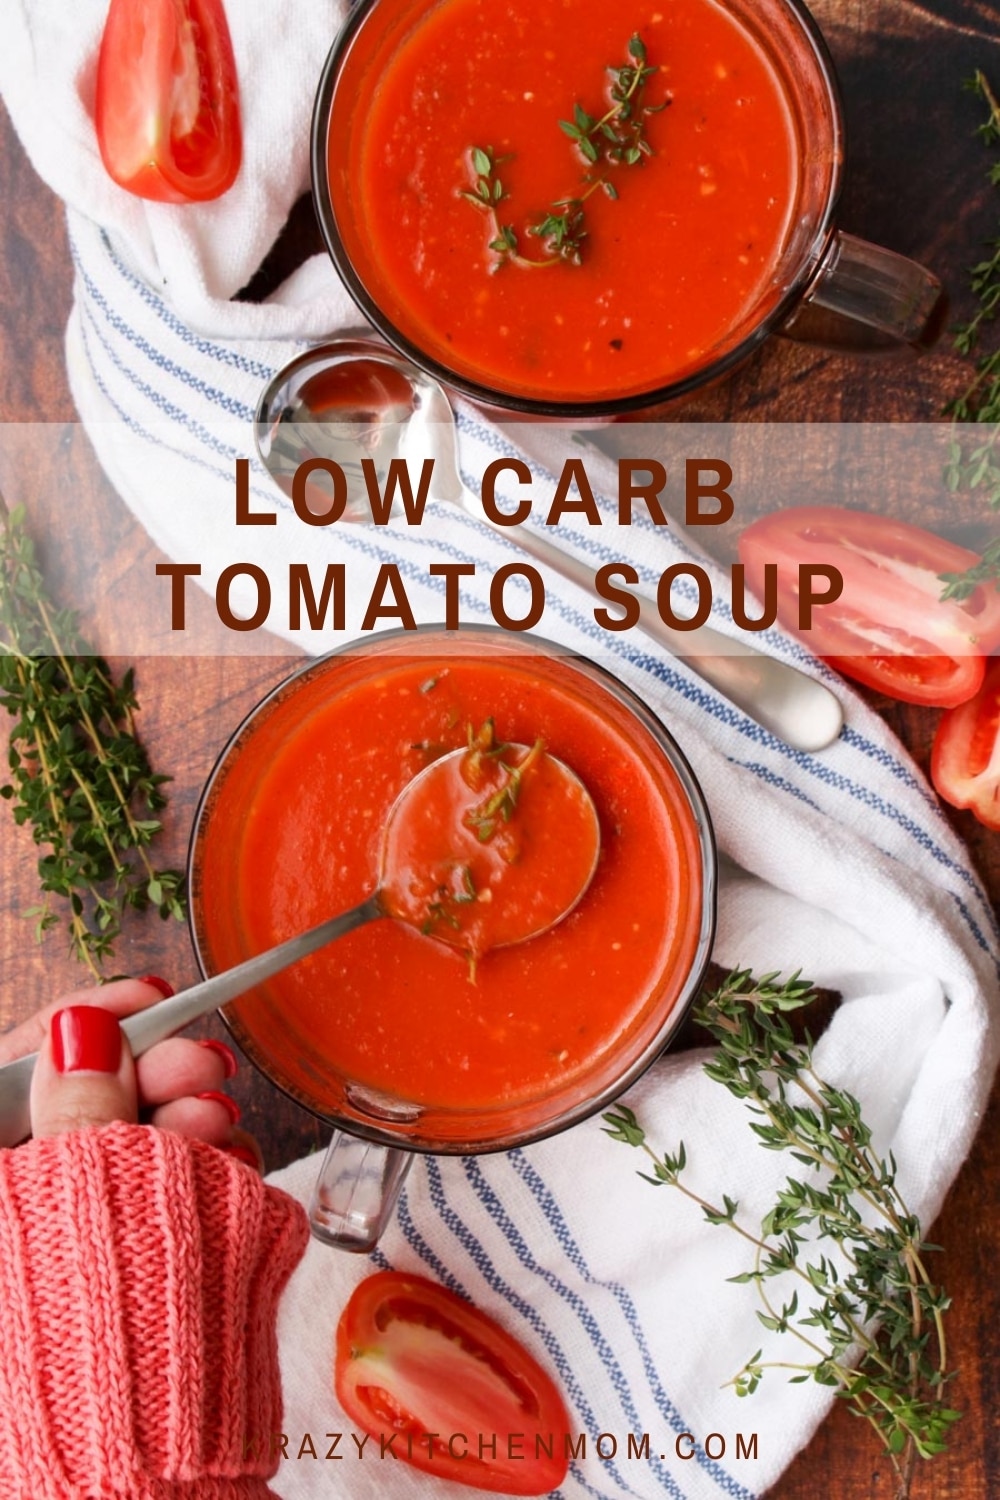 Ready in 30 minutes, you won't even miss the carbs, calories, or the cream in this Low Carb Low-Calorie Homemade Tomato Soup. via @krazykitchenmom